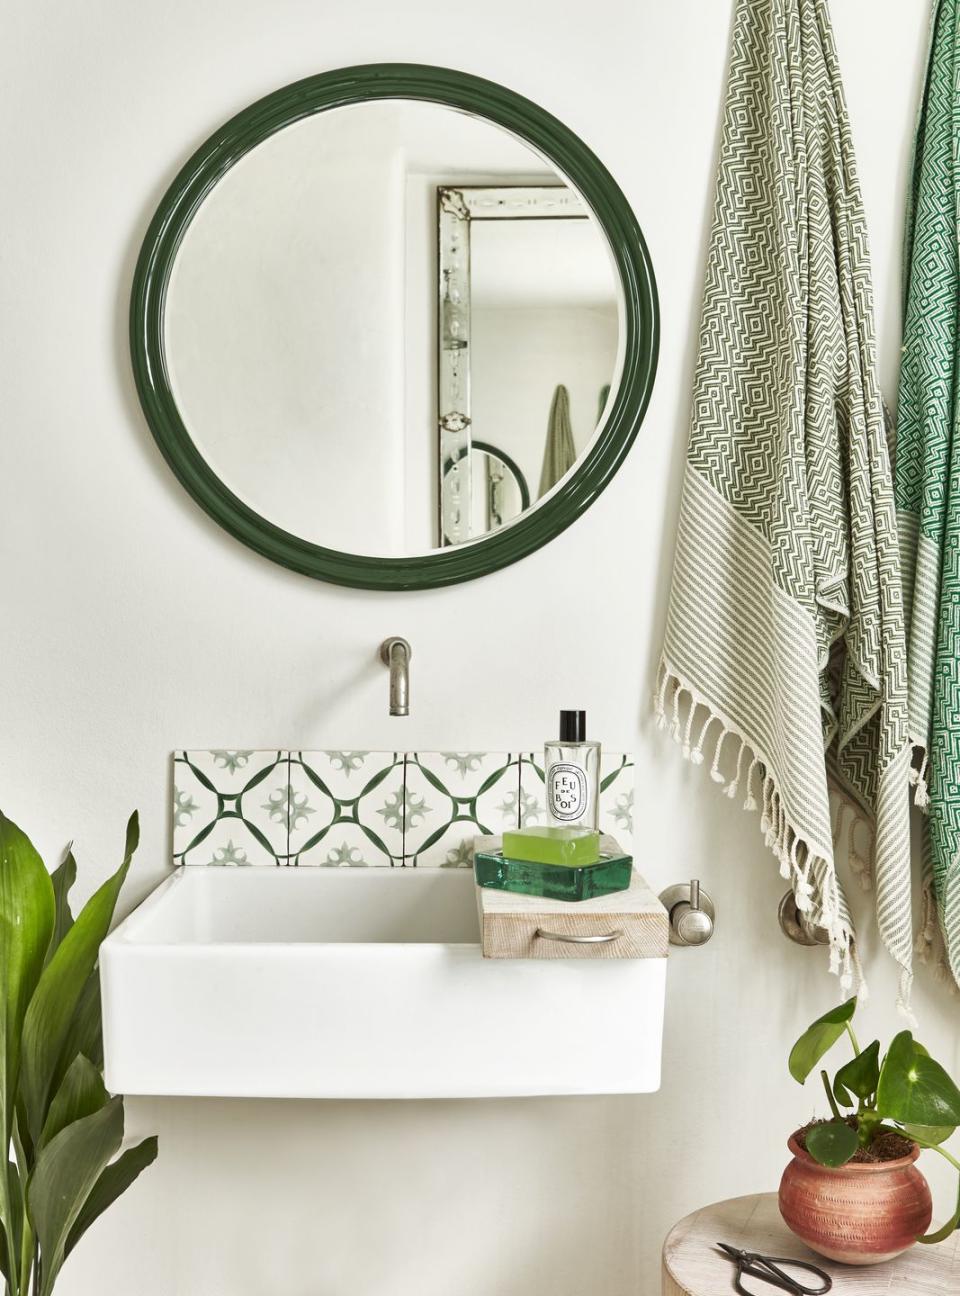 bathroom sink with plants, towels and green tiles